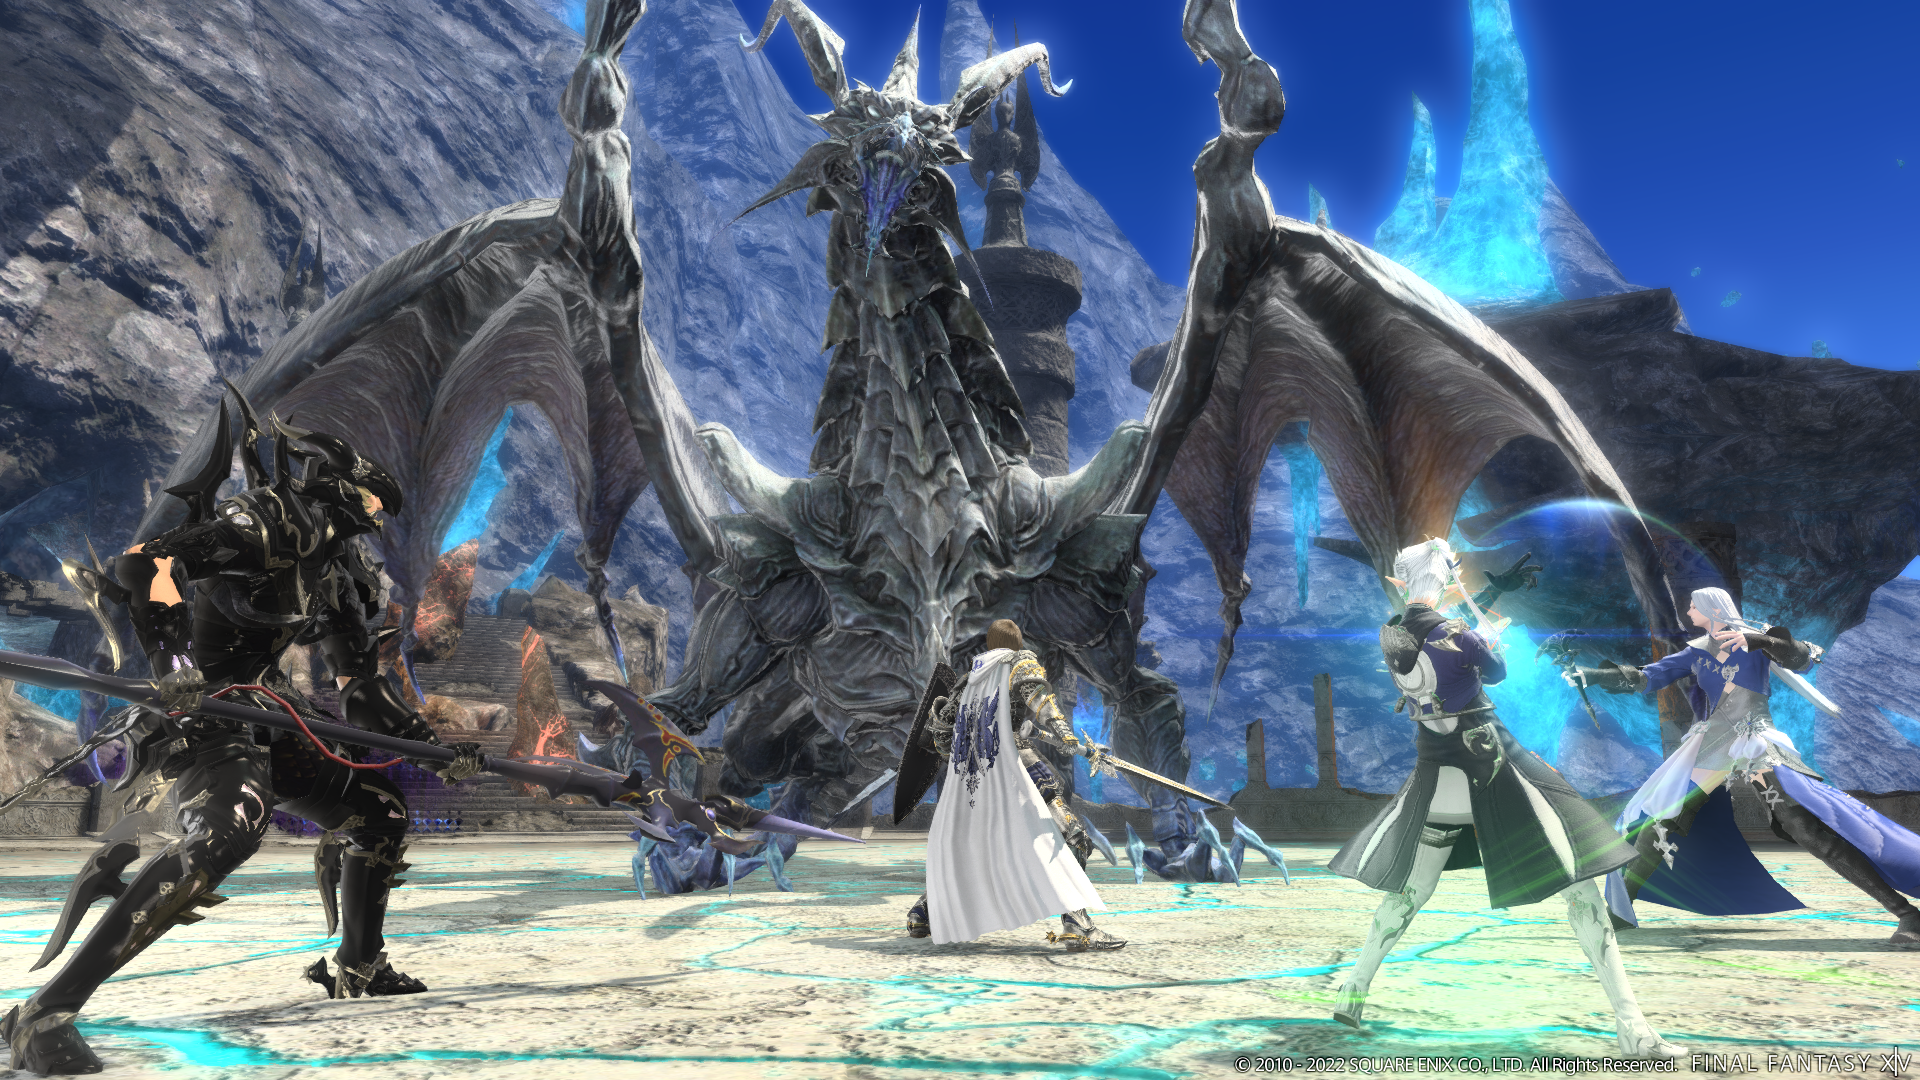 Image for Square Enix advising Final Fantasy 14 players to change passwords due to hacking attempt